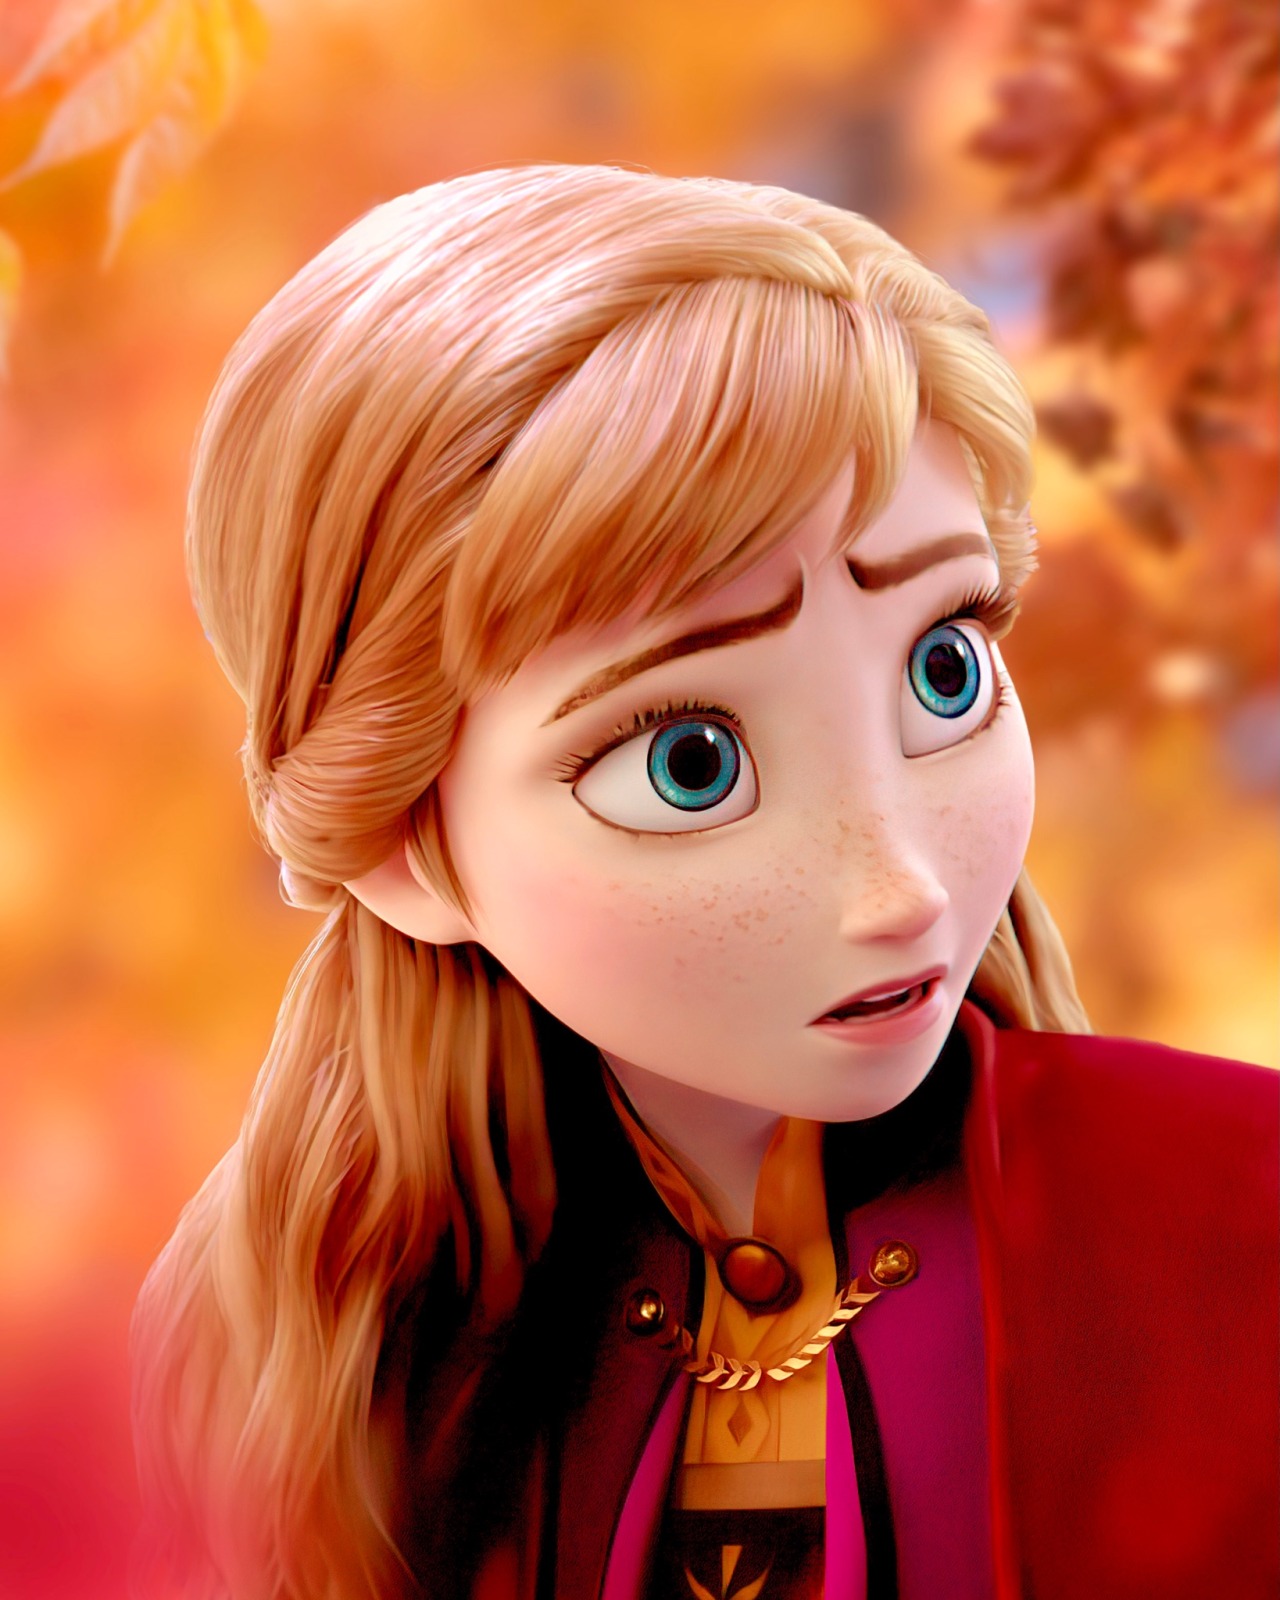 Elsa And Anna Images Wallpapers